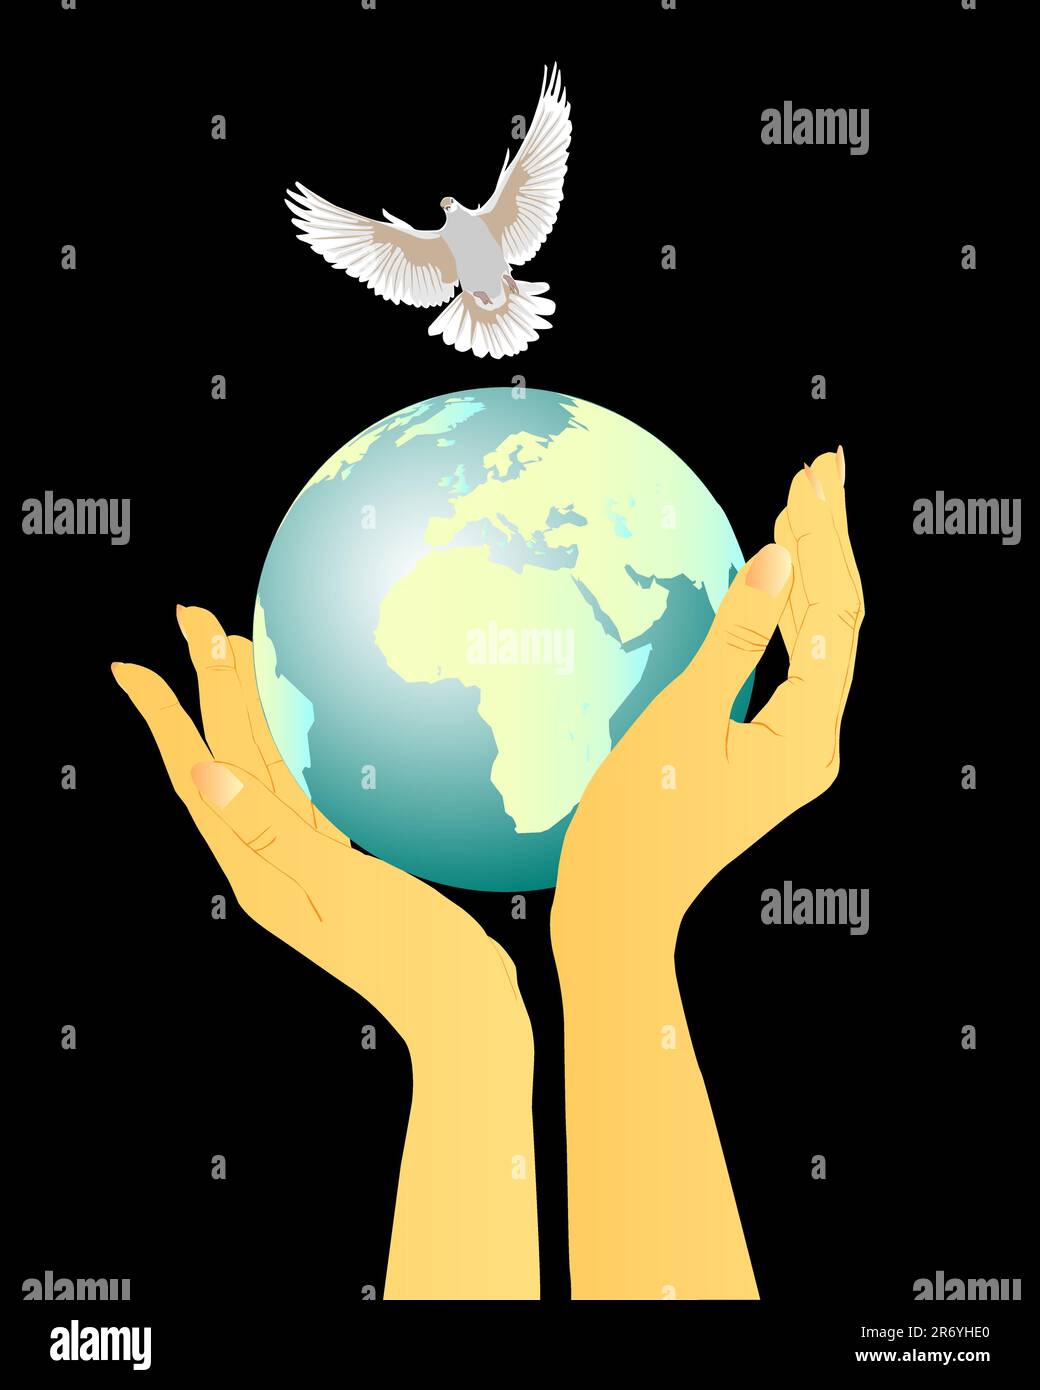 Hands holding globe and a flying pigeon on a black background Stock Vector